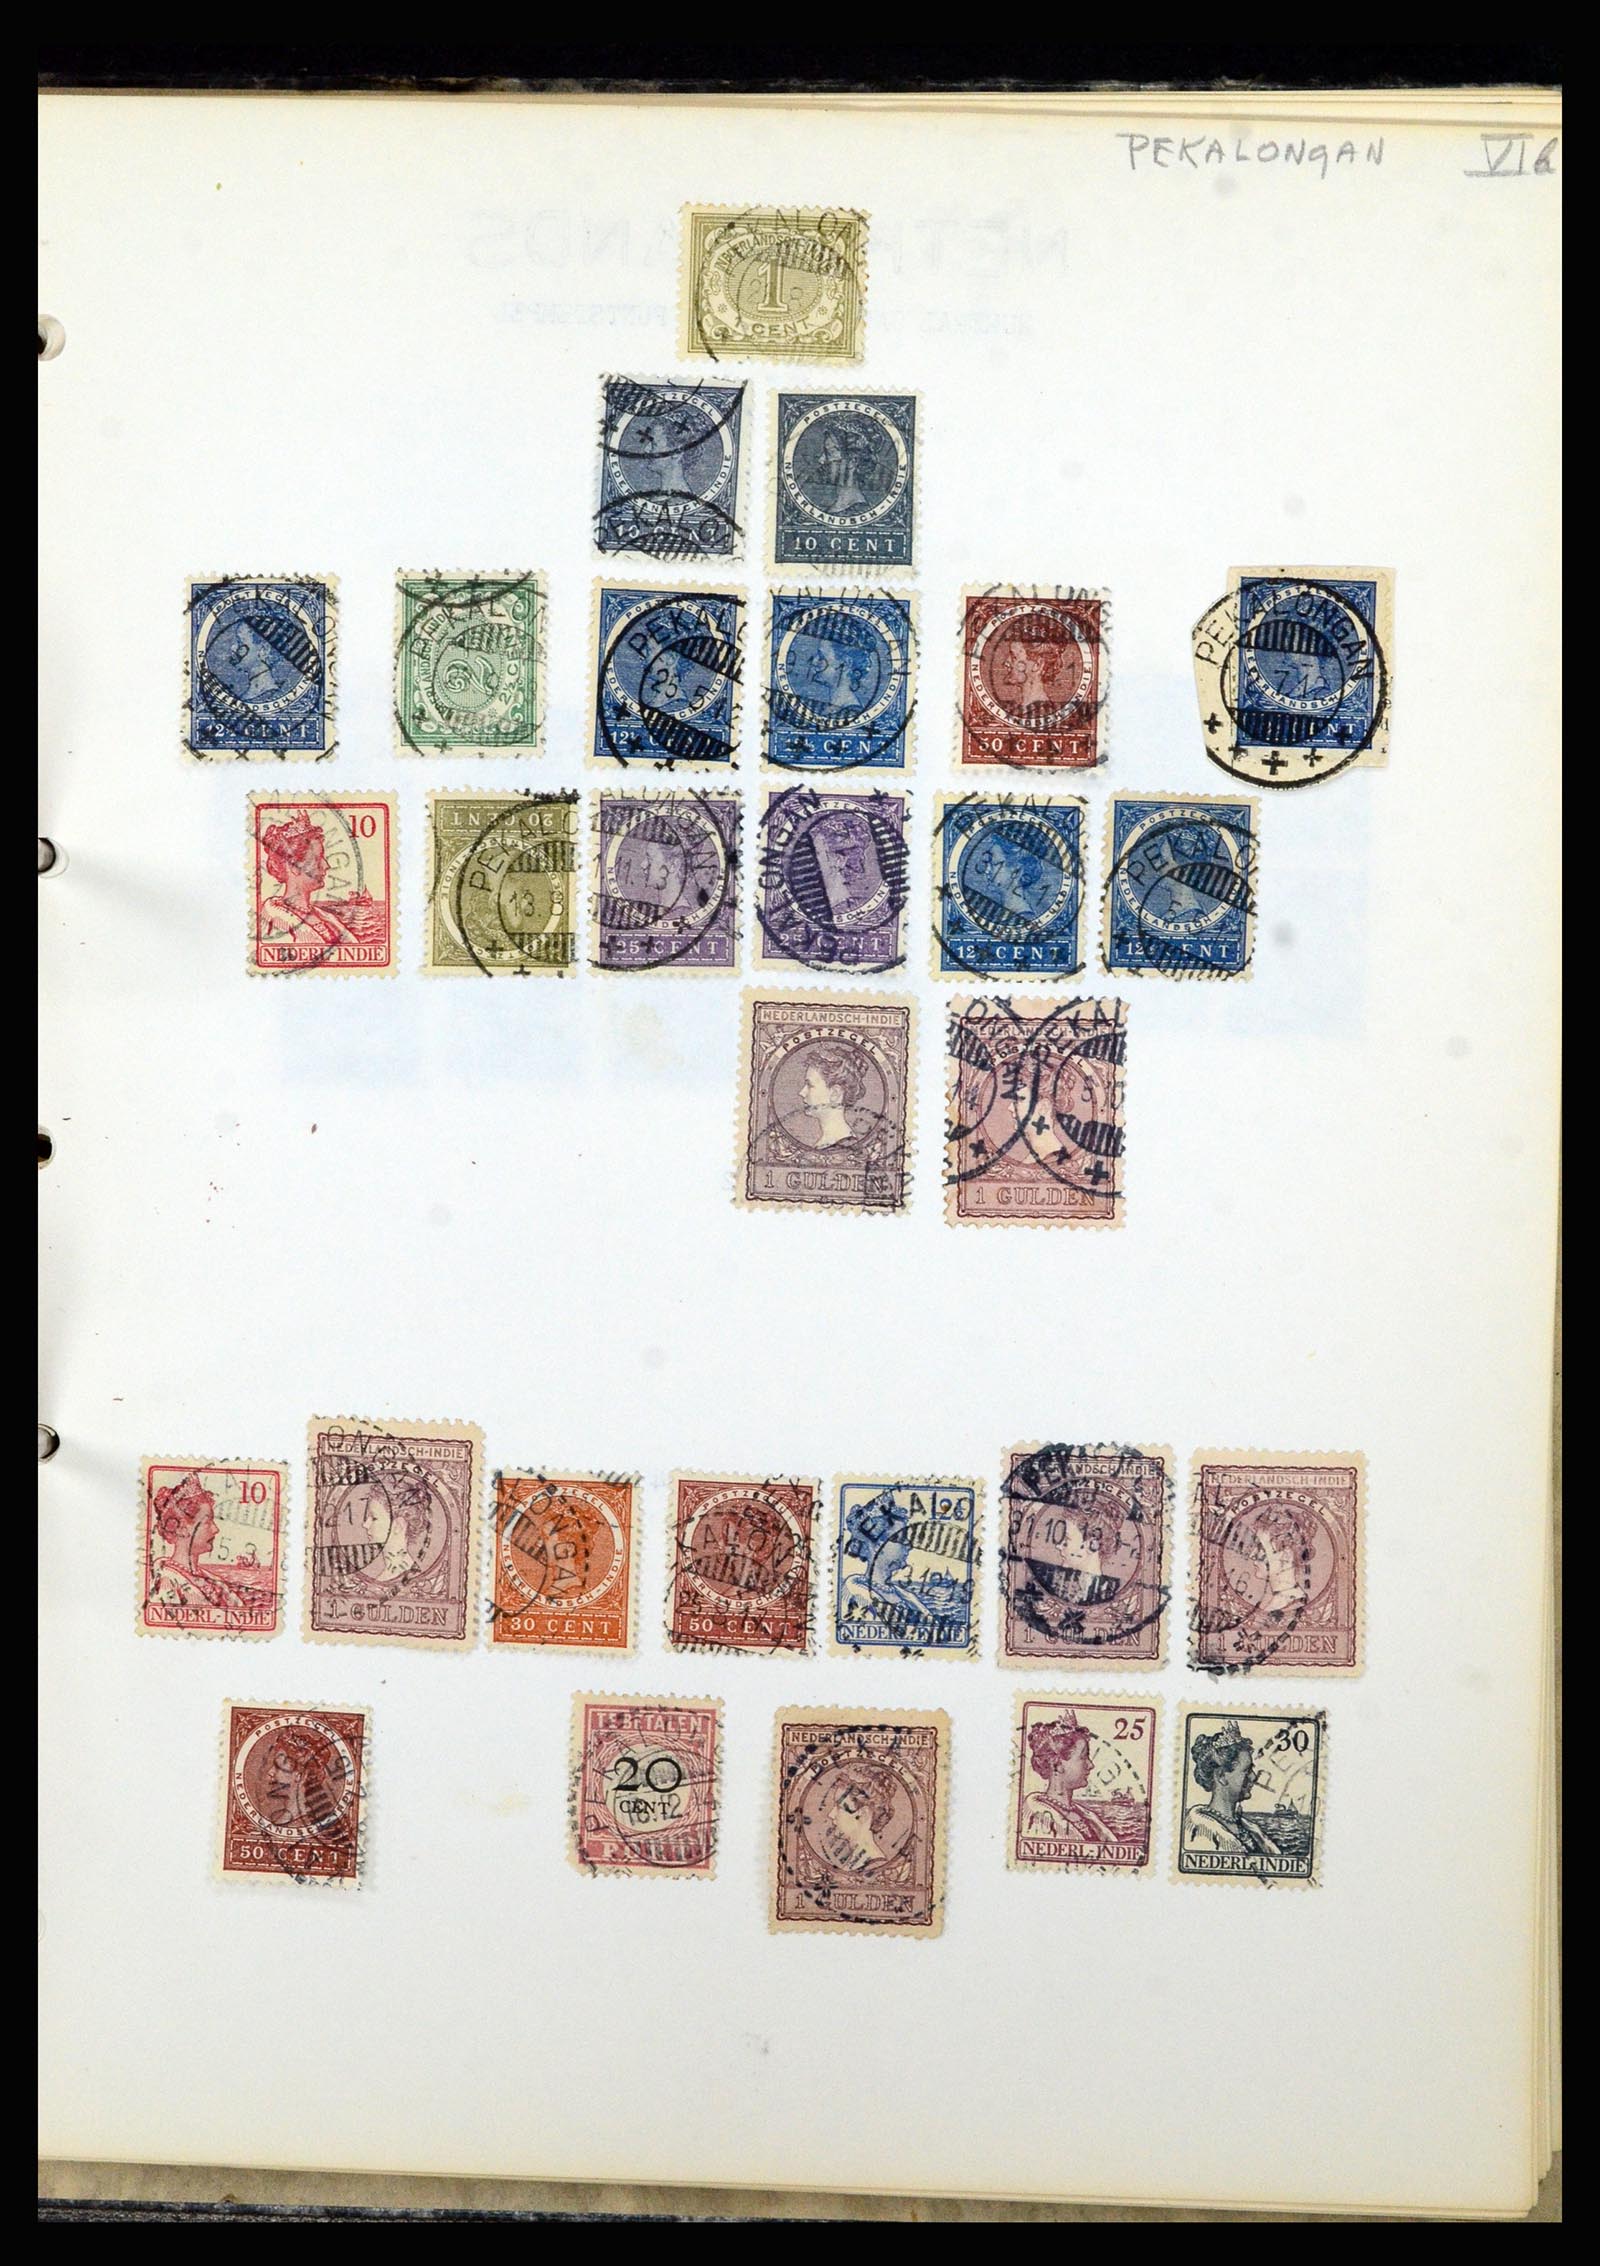 36841 089 - Stamp collection 36841 Dutch east Indies short bar cancels.